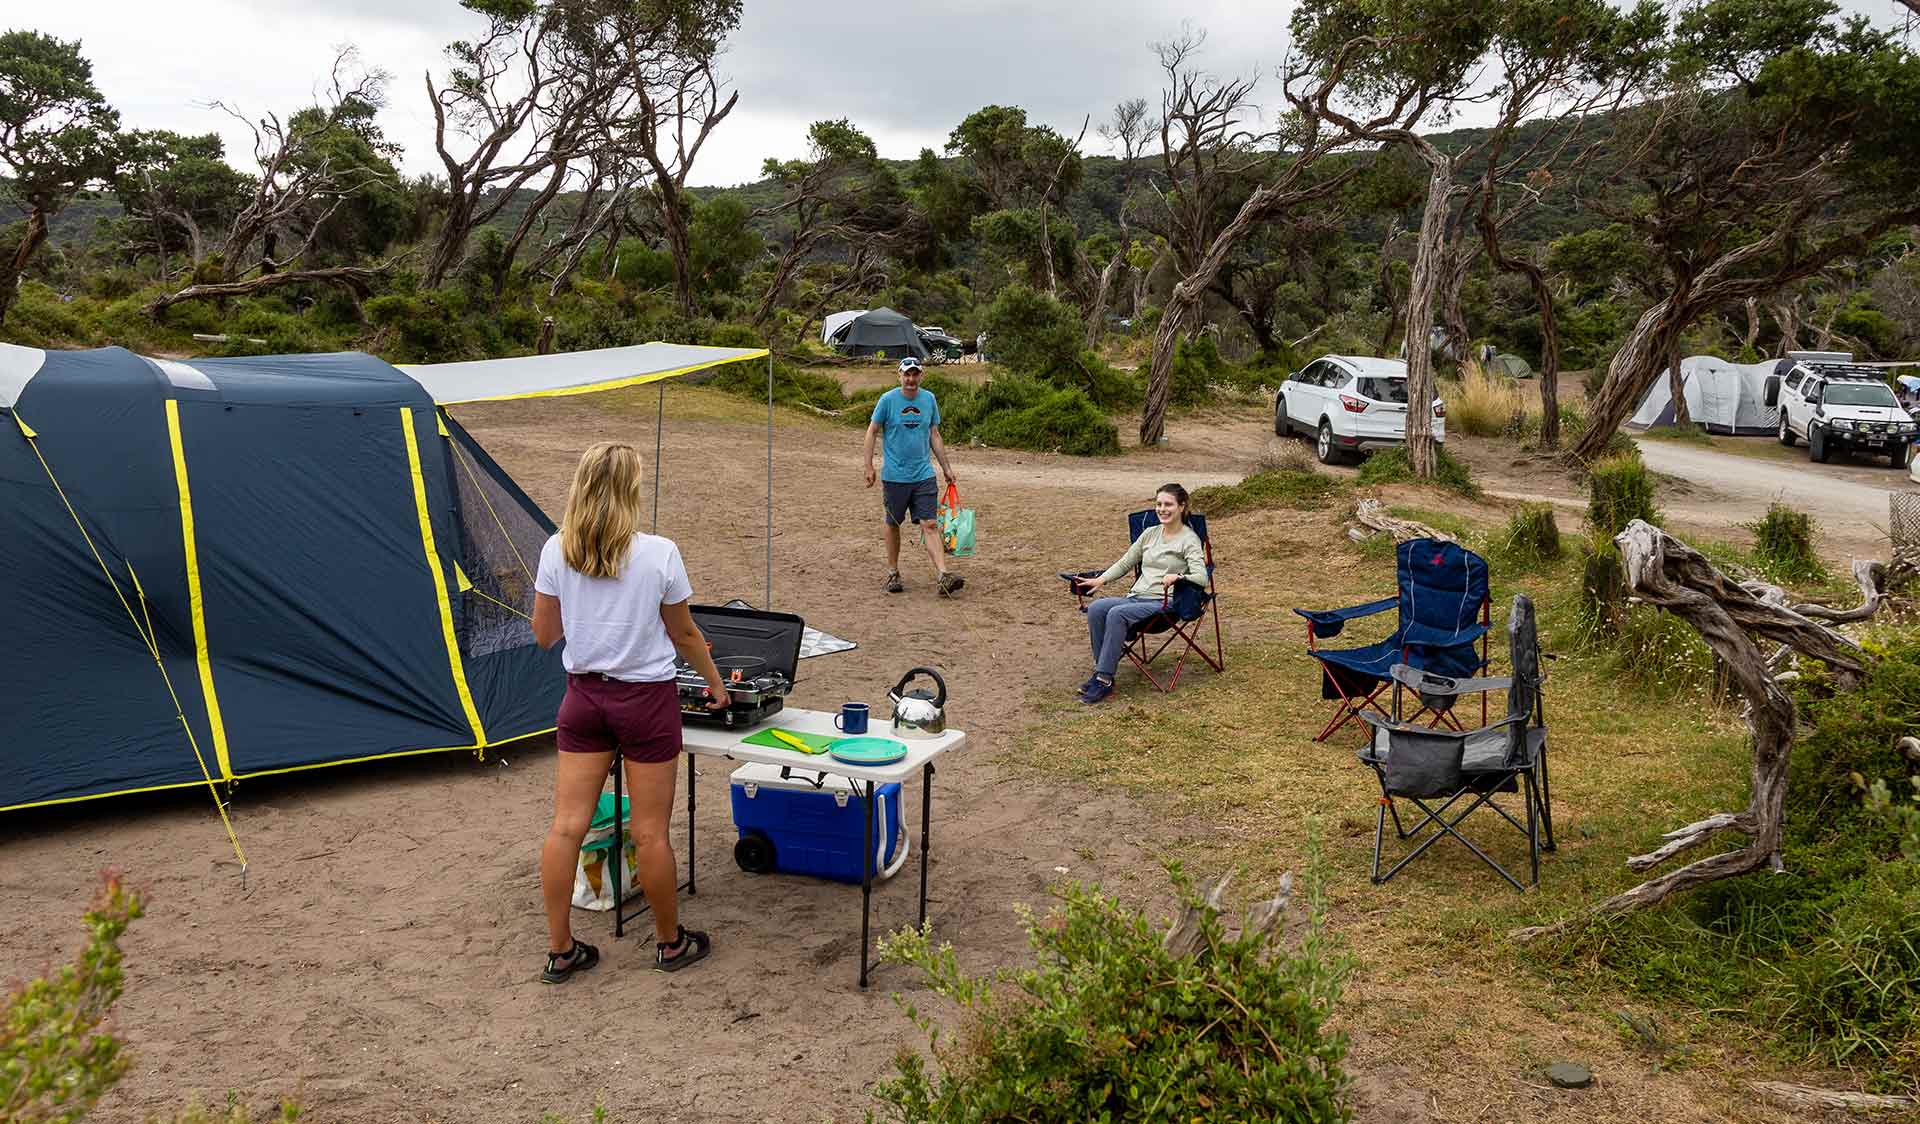 A man walks towards a women who is cooking at a stove next to their tent at Tidal River Campground at Wilsons Promontory National Park